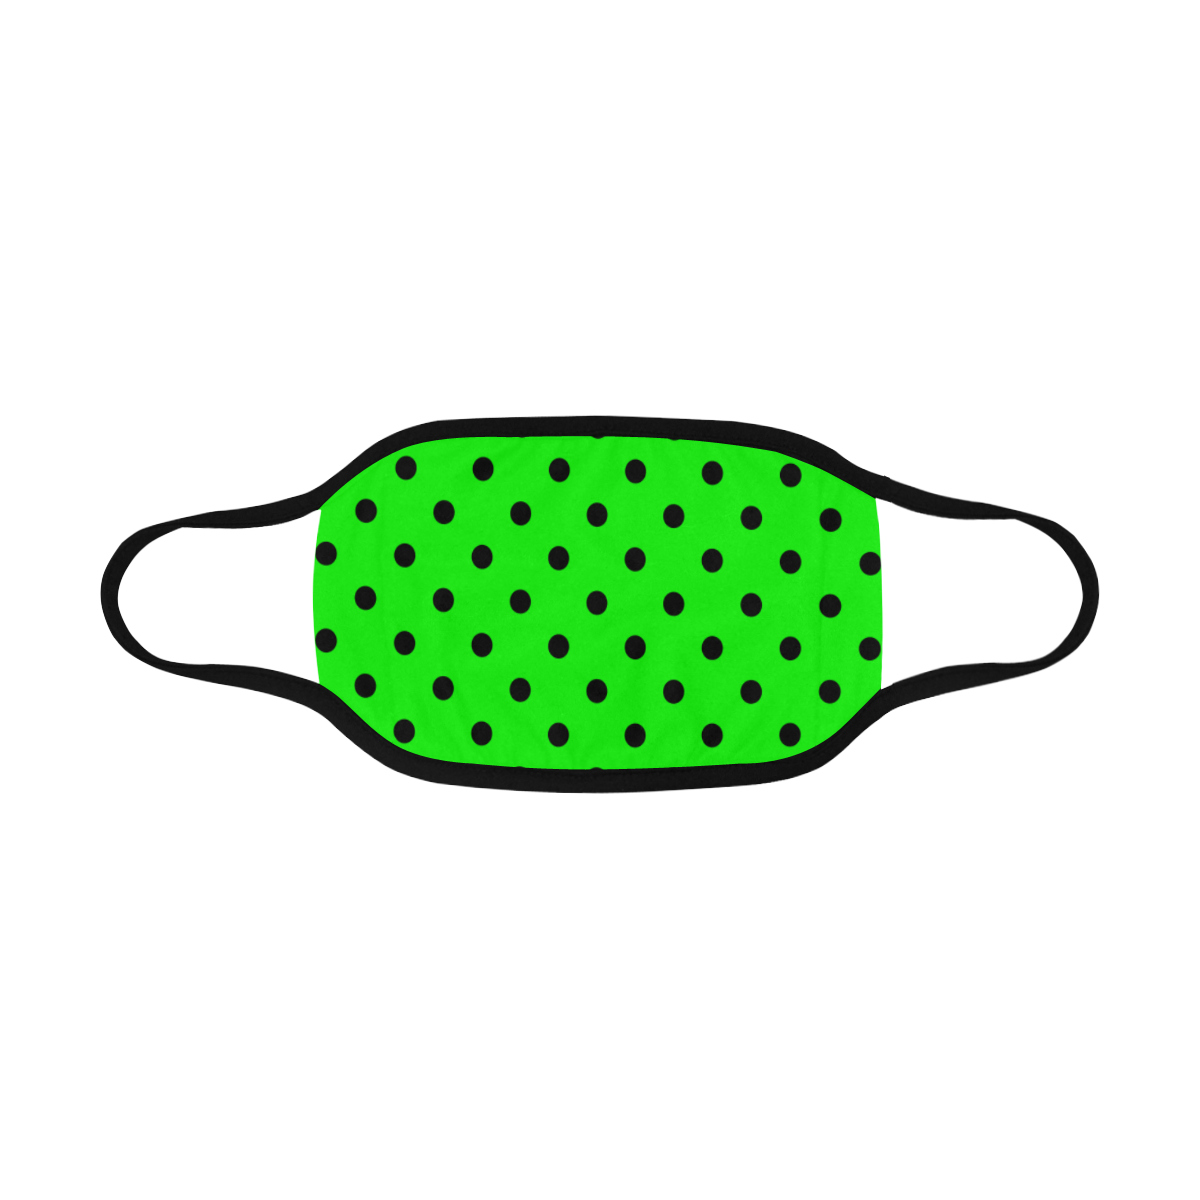 Polka Dots Black on Neon Green Mouth Mask